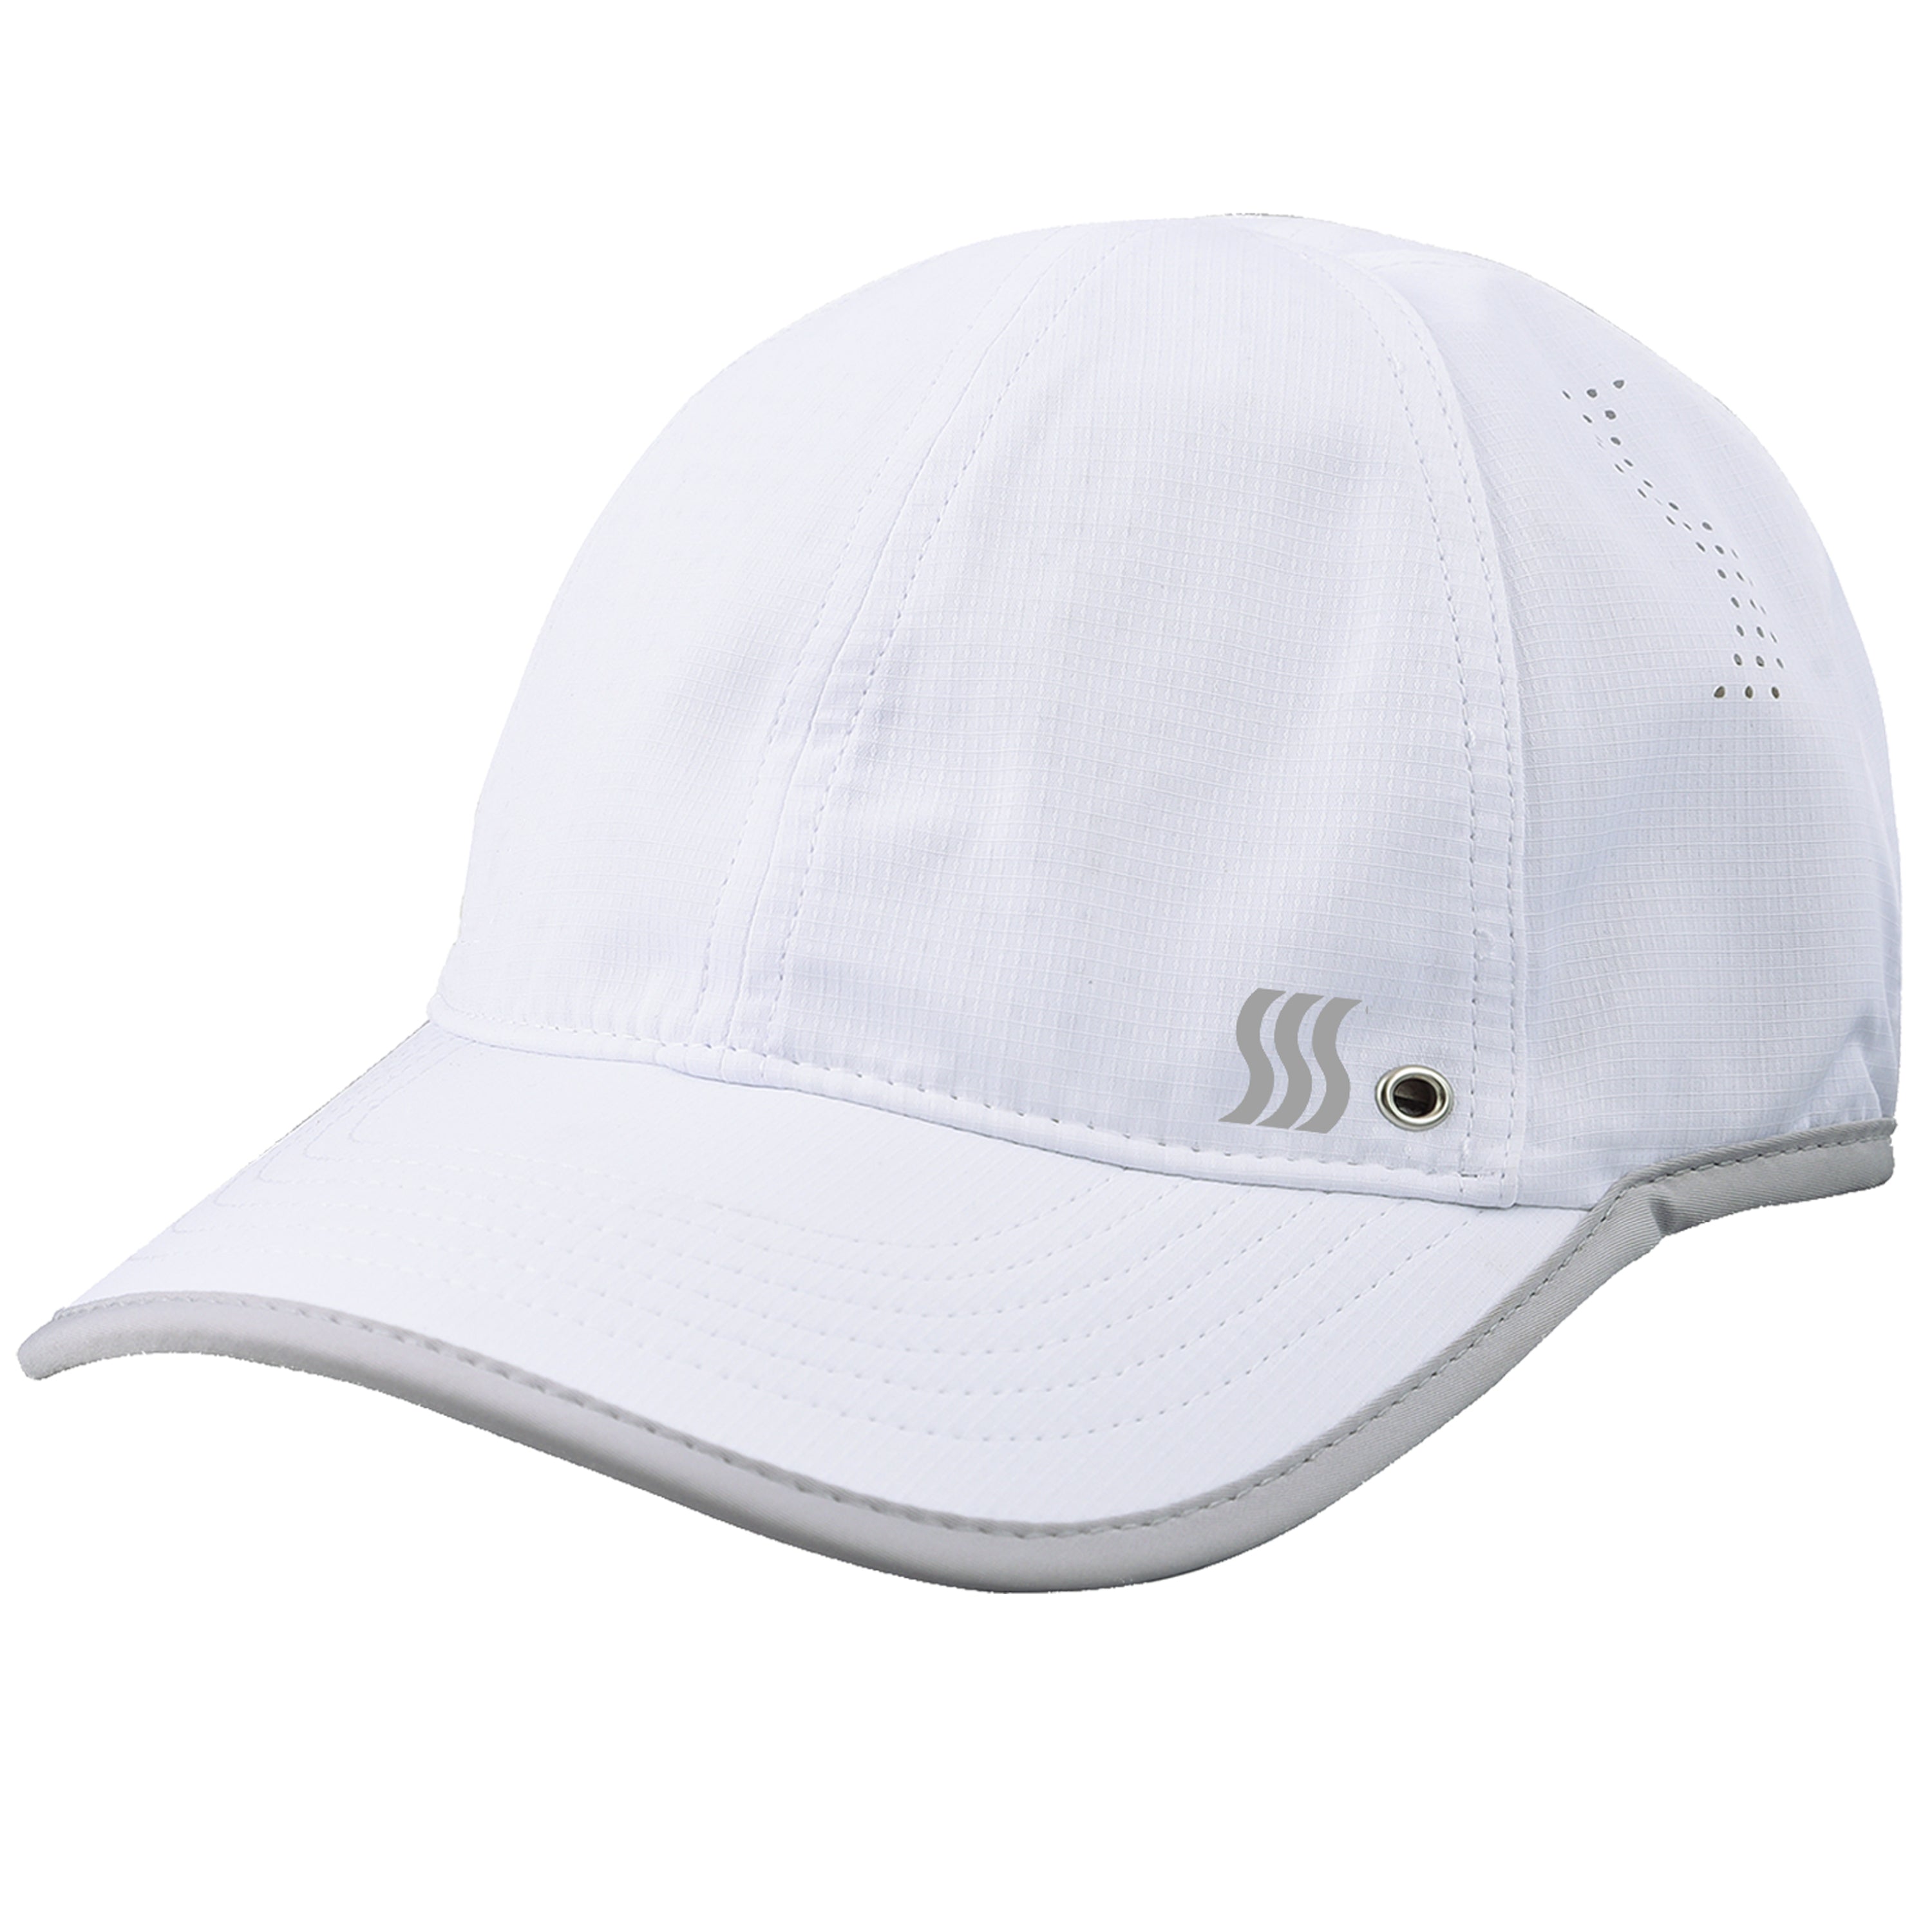 ALL SPORTS HAT